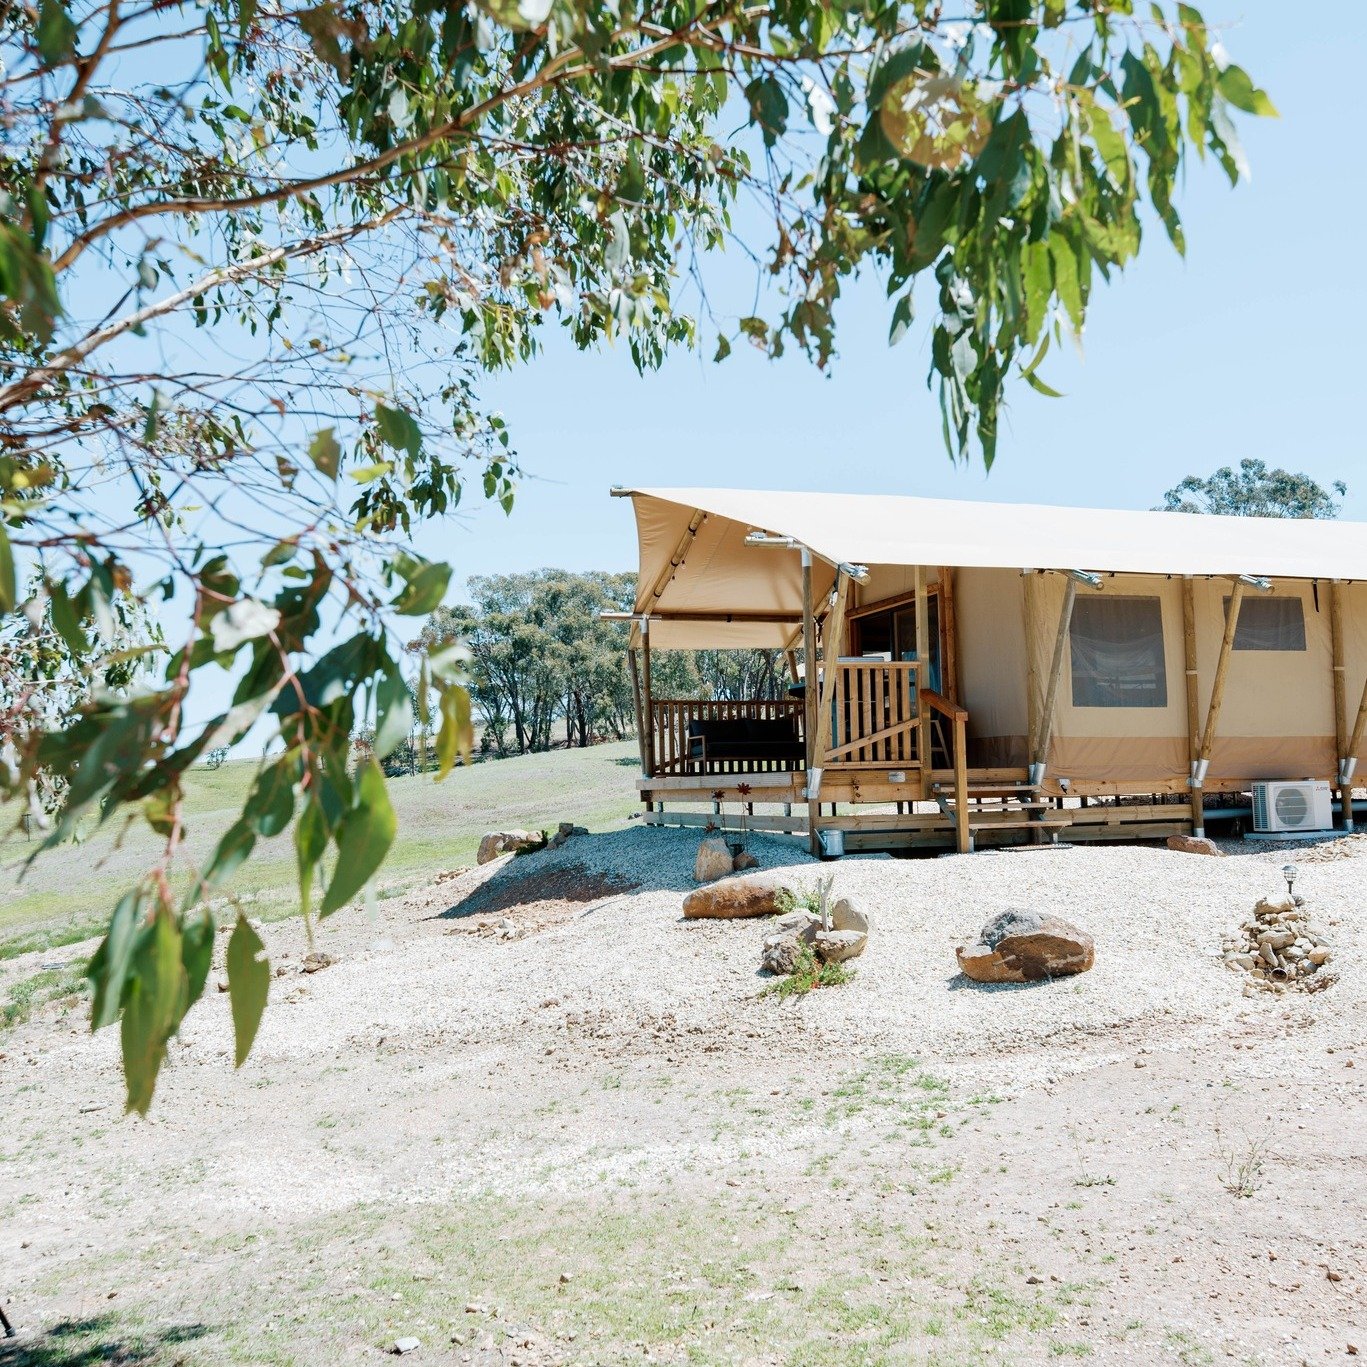 Introducing @theyellowboxwood, Heathcote's newest accommodation option.

These safari-style glamping tents are just one of the many options available when you visit the region.

For more information on accommodation head to our website via the link i